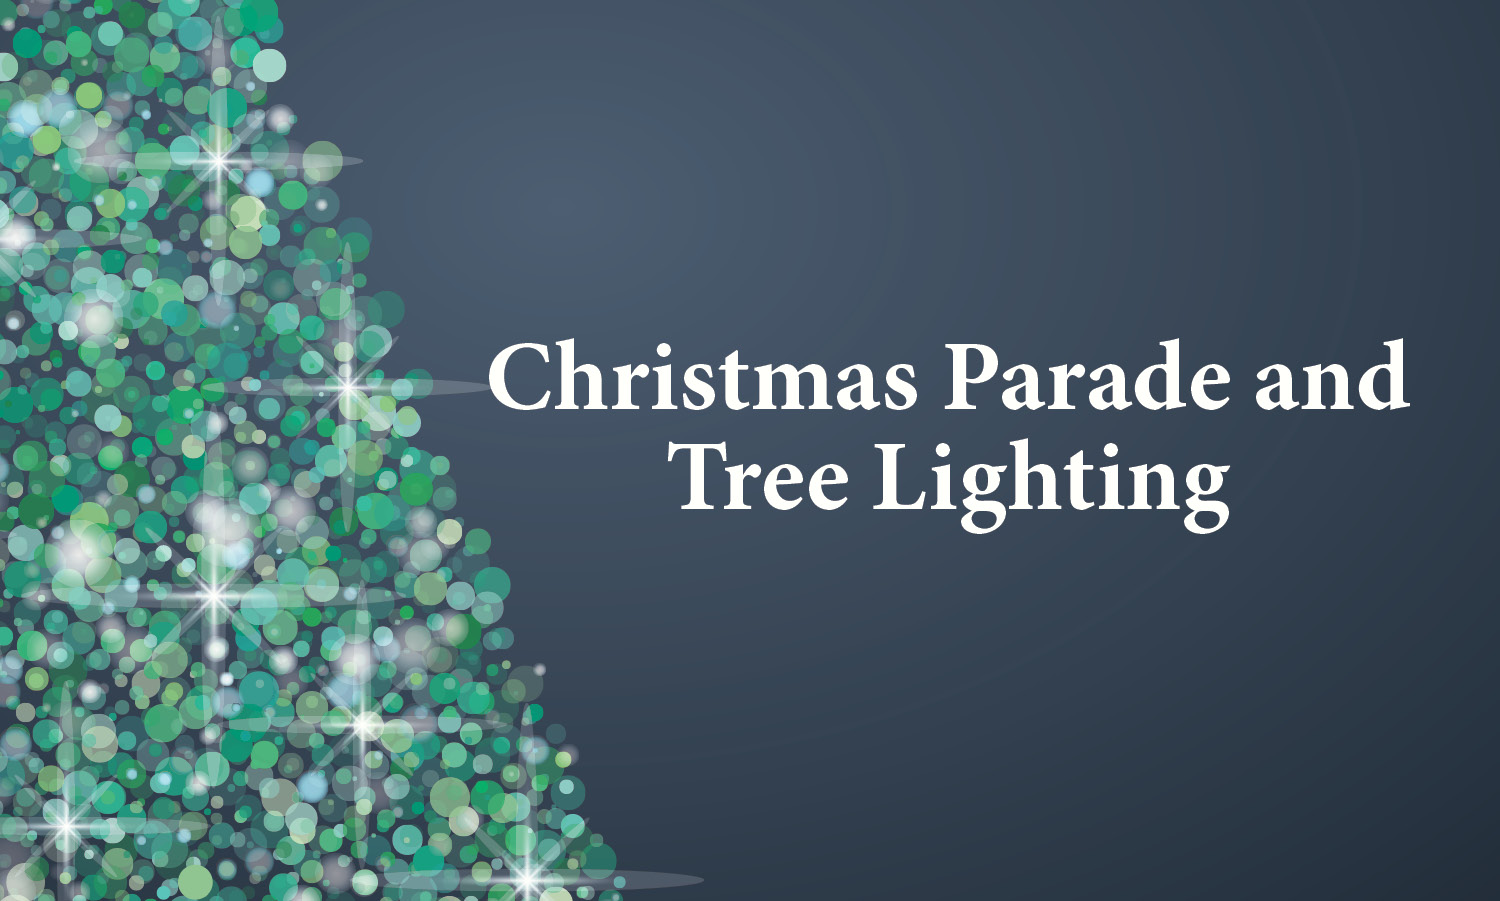 Illustration of abstract Christmas tree. The tree is lit up in shades of green and white against a dark blue/gray background.